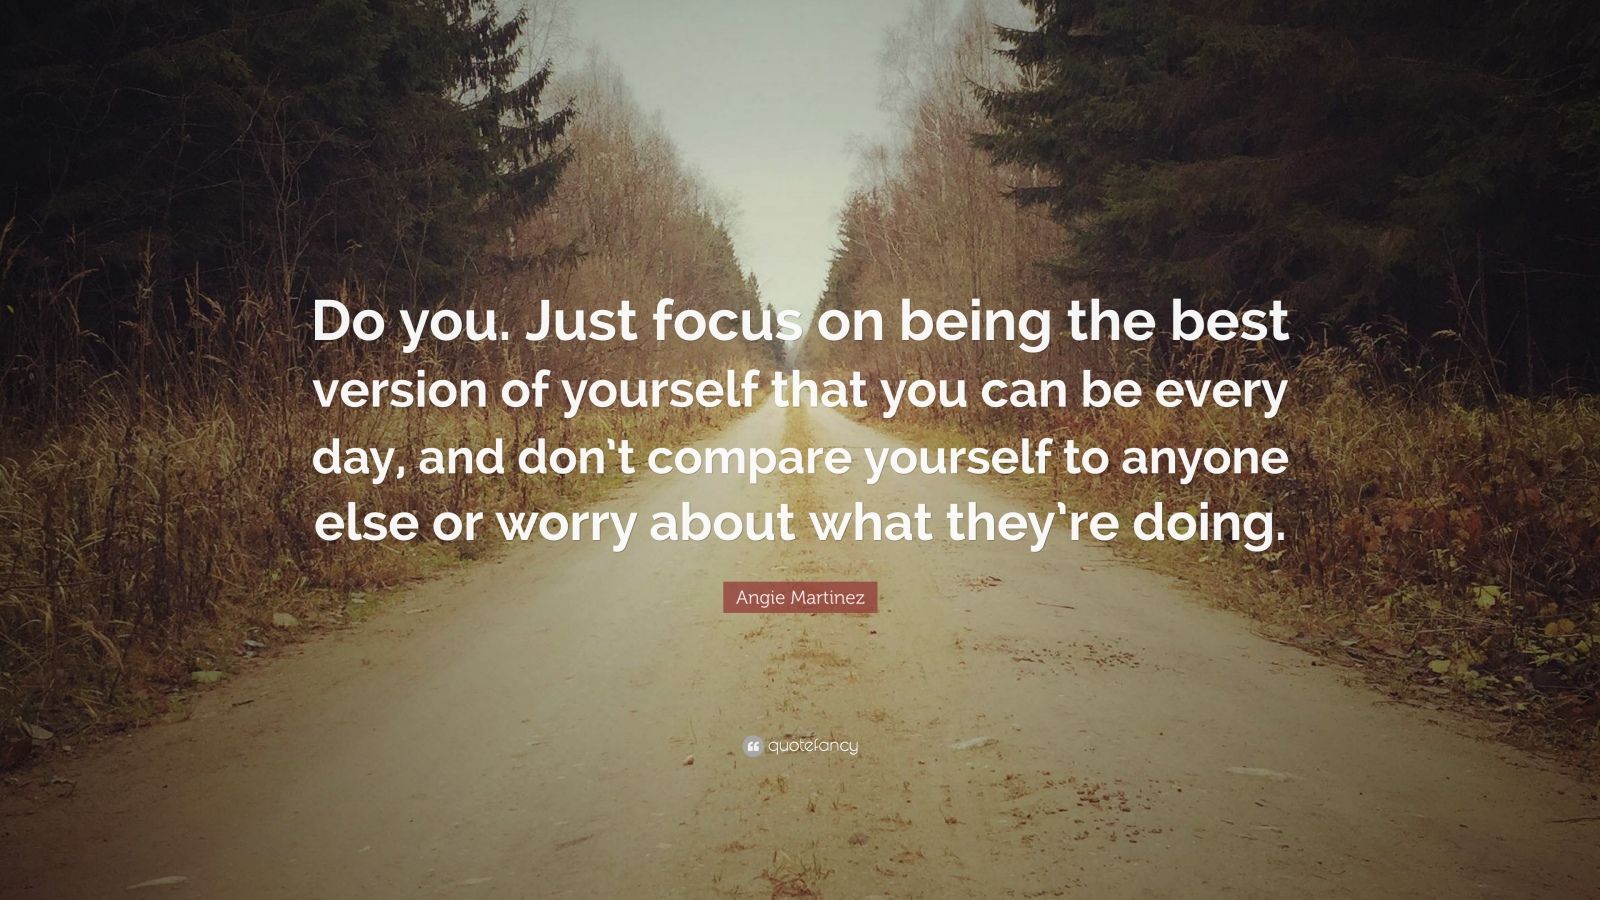 Angie Martinez Quote: “Do you. Just focus on being the best version of ...